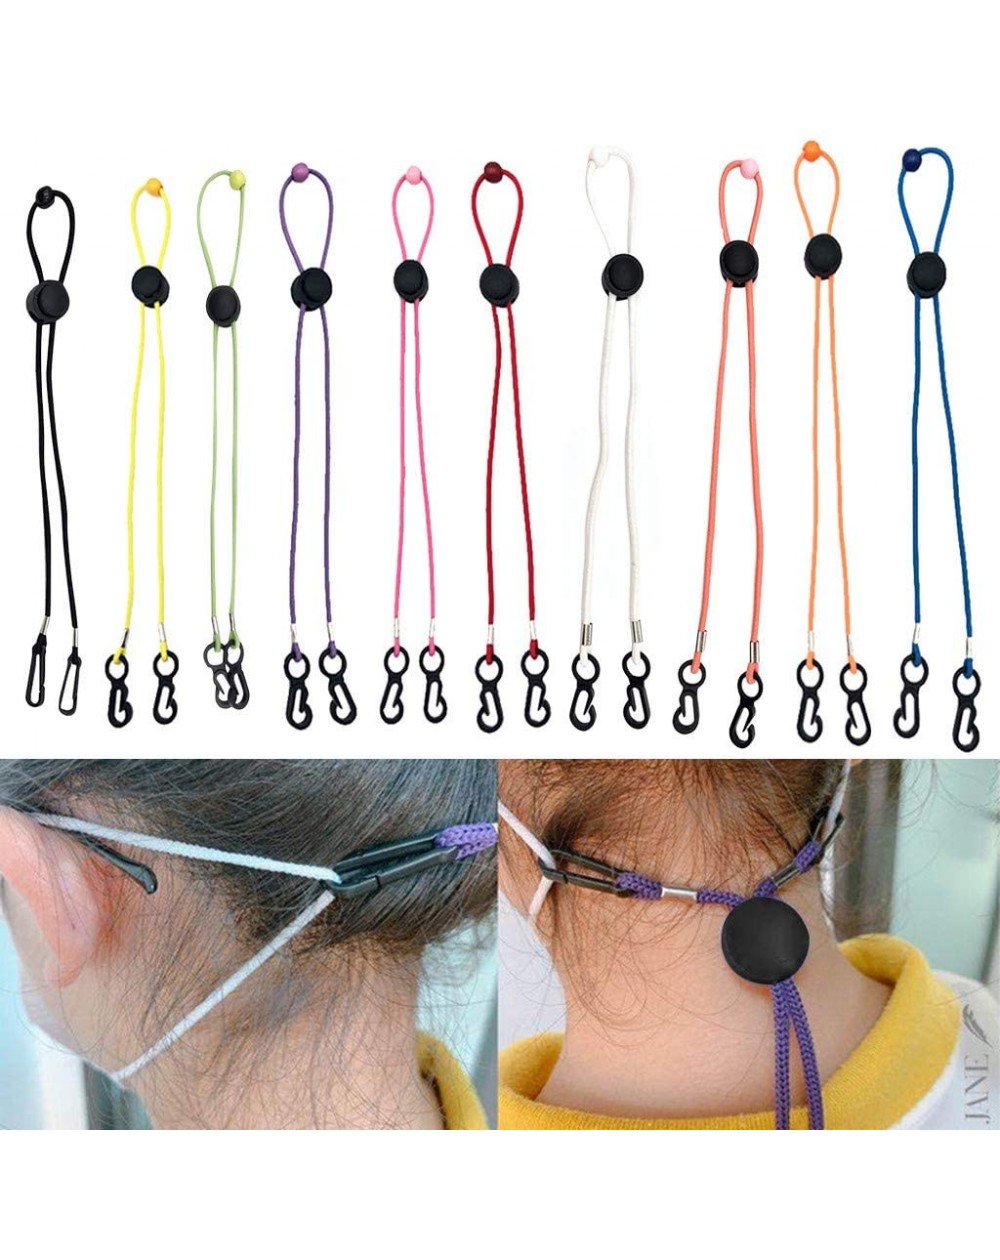 Cake & Cupcake Toppers Macks Lanyards for Adults Kids- Comfort Neck Straps for Face Bandana Adjustable Chain Ear Holder Rope ...